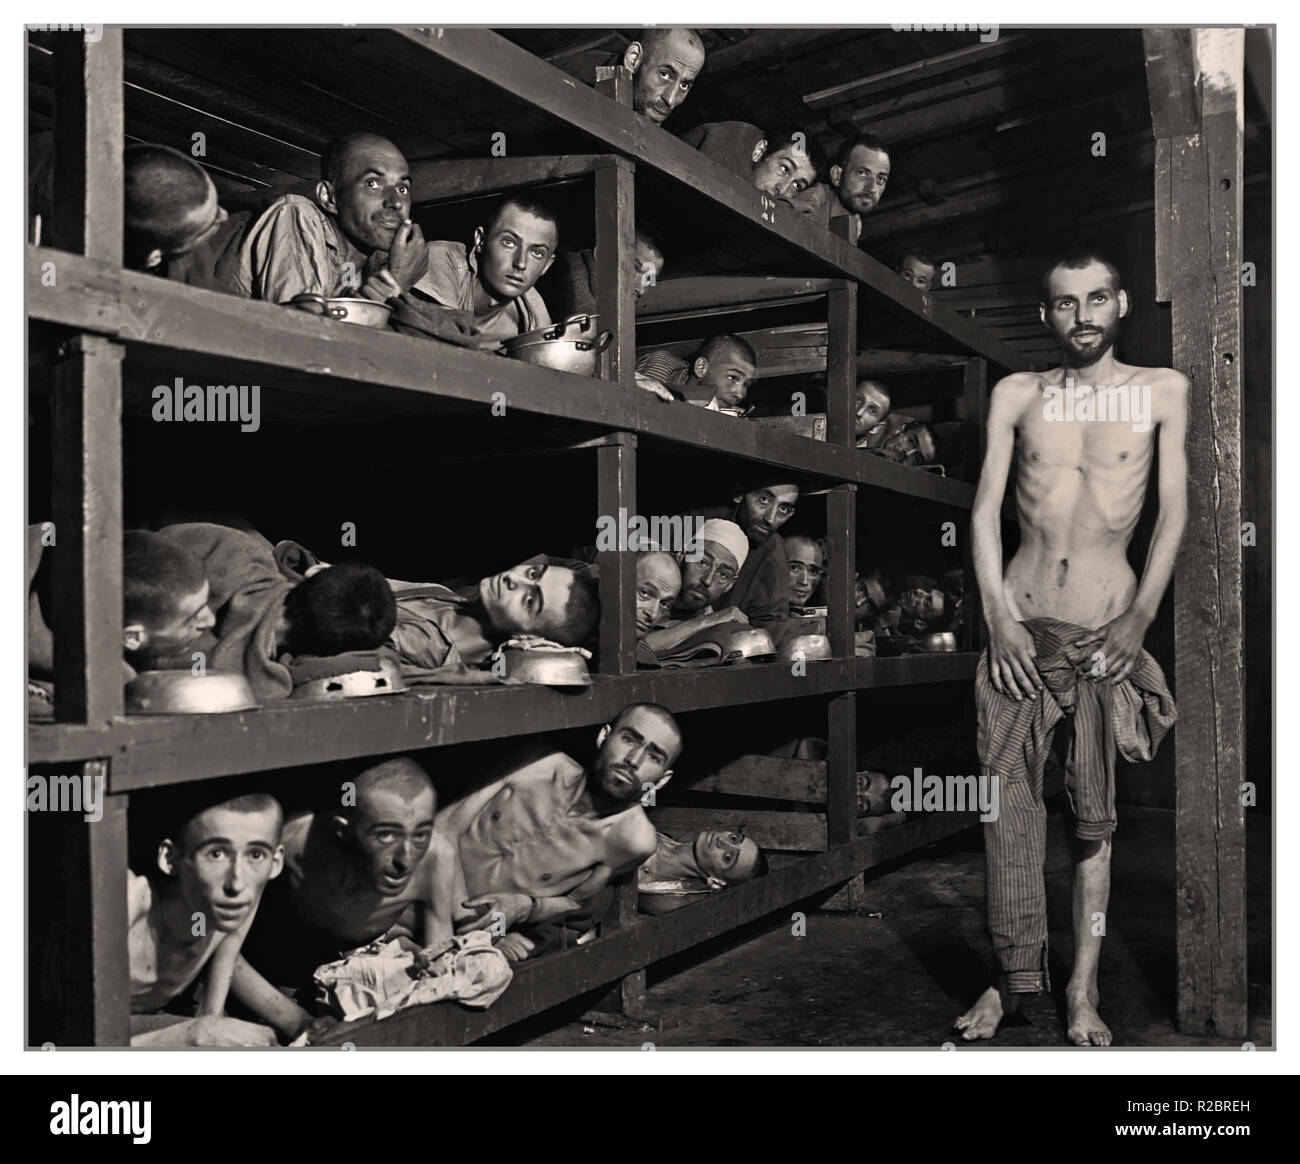 BUCHENWALD Vintage WW2 Harrowing image of skeletal liberated camp survivors 1945  Nazi Germany Buchenwald Concentration Camp near Jena Germany. Slave Labourers WWII interior sleeping quarters. Many had died from malnutrition when US troops of the 80th Division entered the camp in Germany, April 16, 1945. Stock Photo